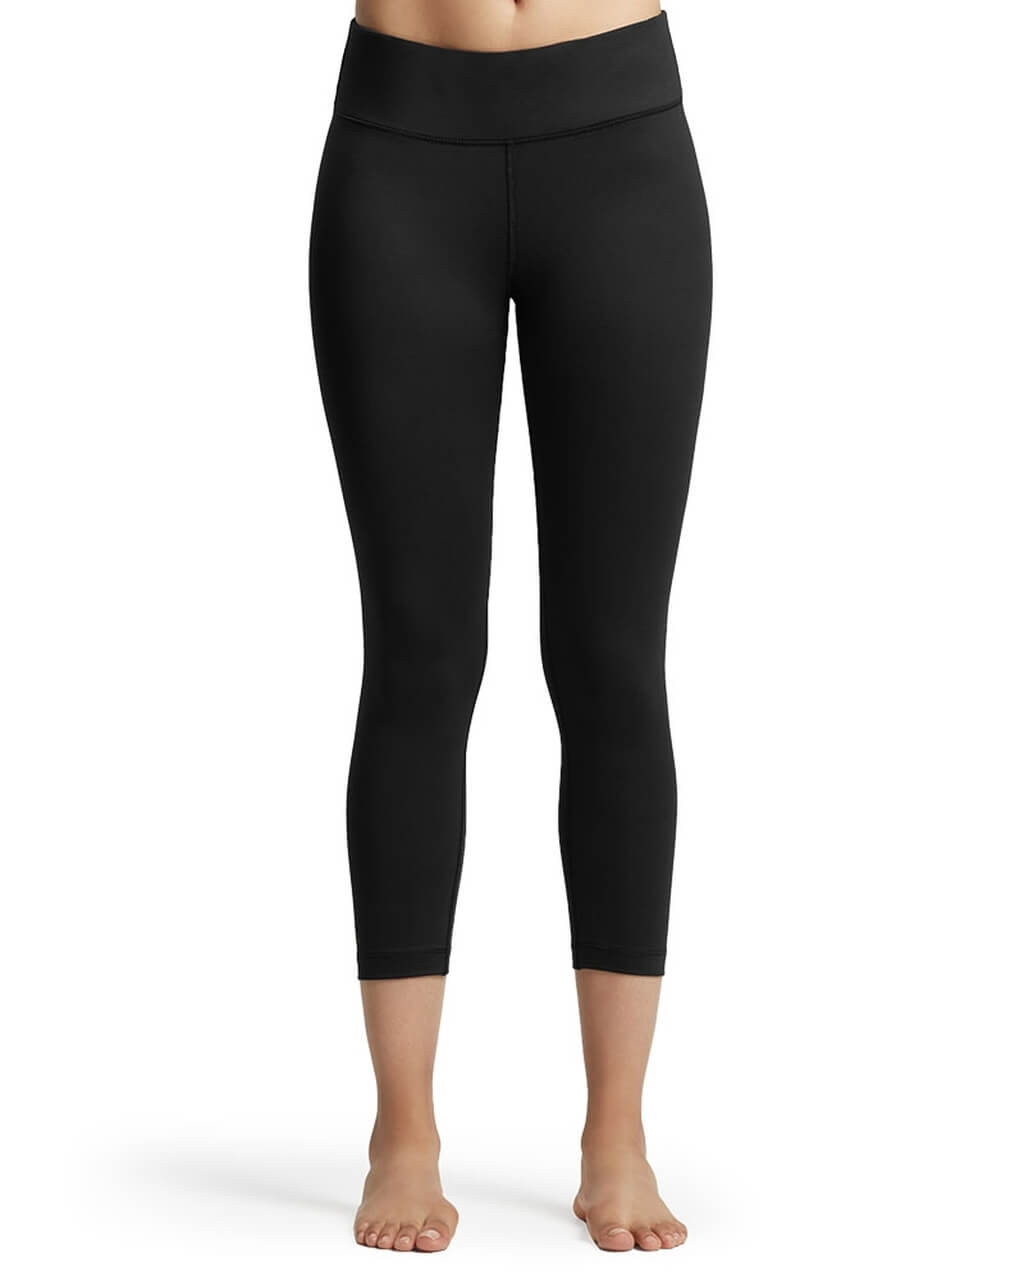 The best women's compression capris you can buy